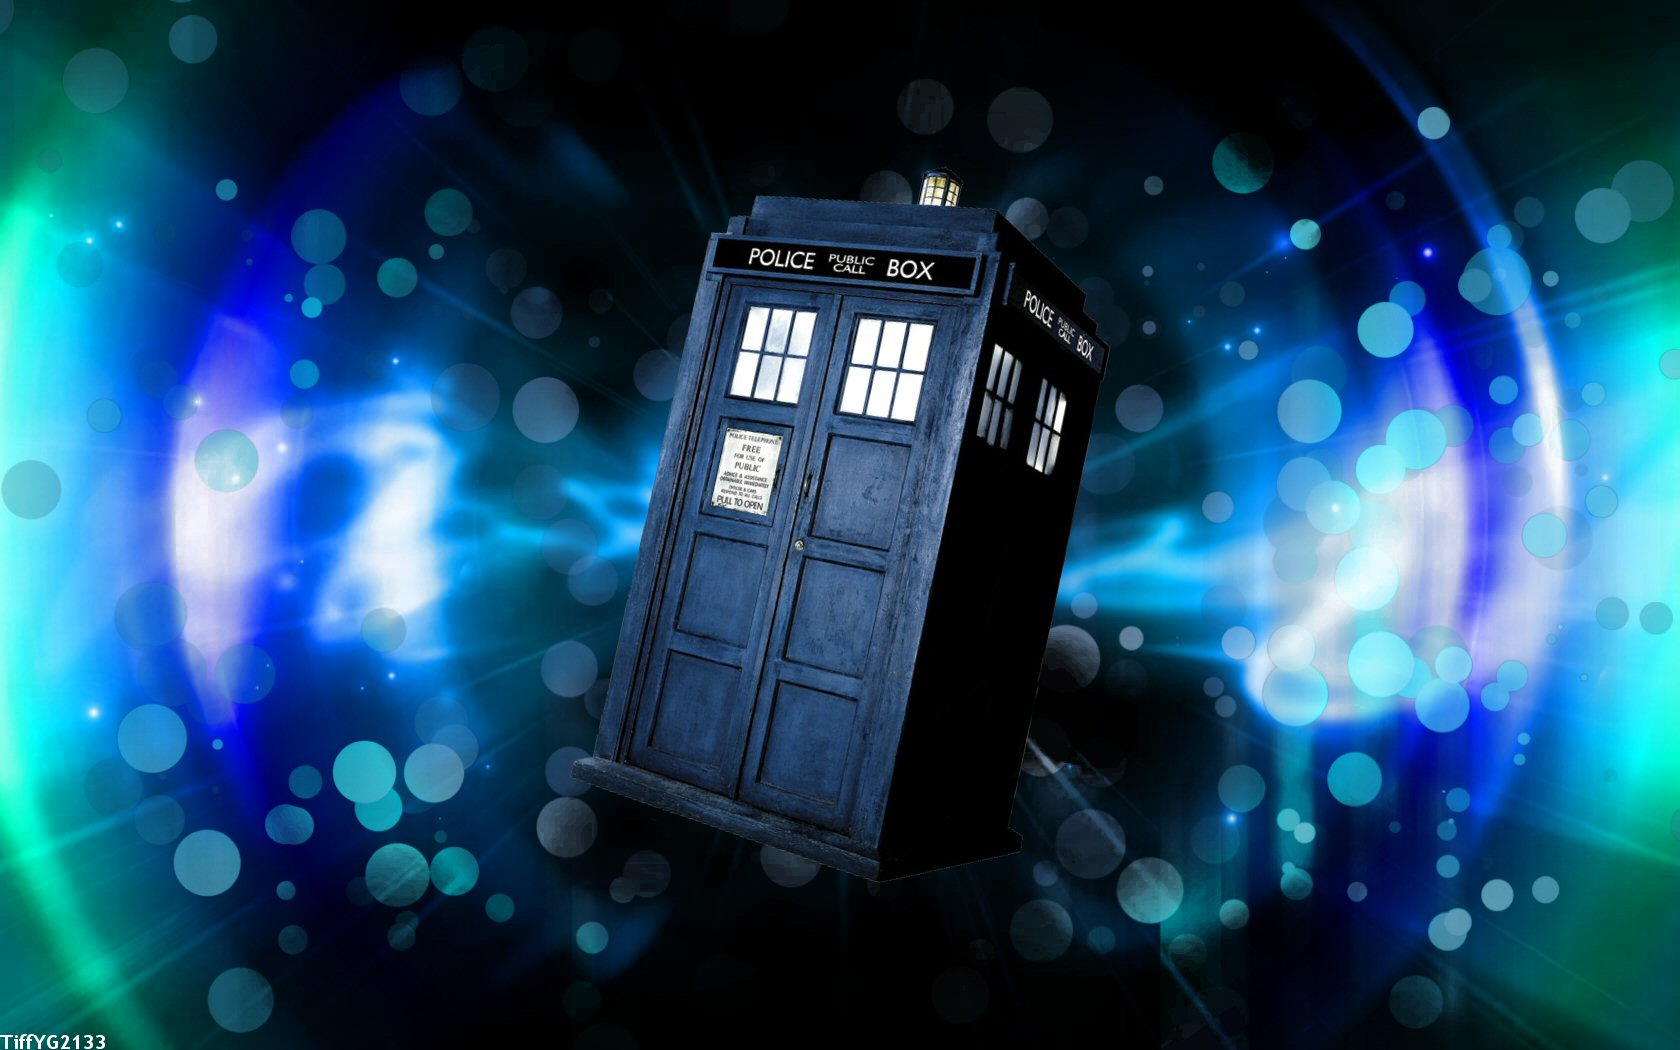 579154 1920x1080 doctor who the doctor minimalism tardis wallpaper JPG 441  kB  Rare Gallery HD Wallpapers